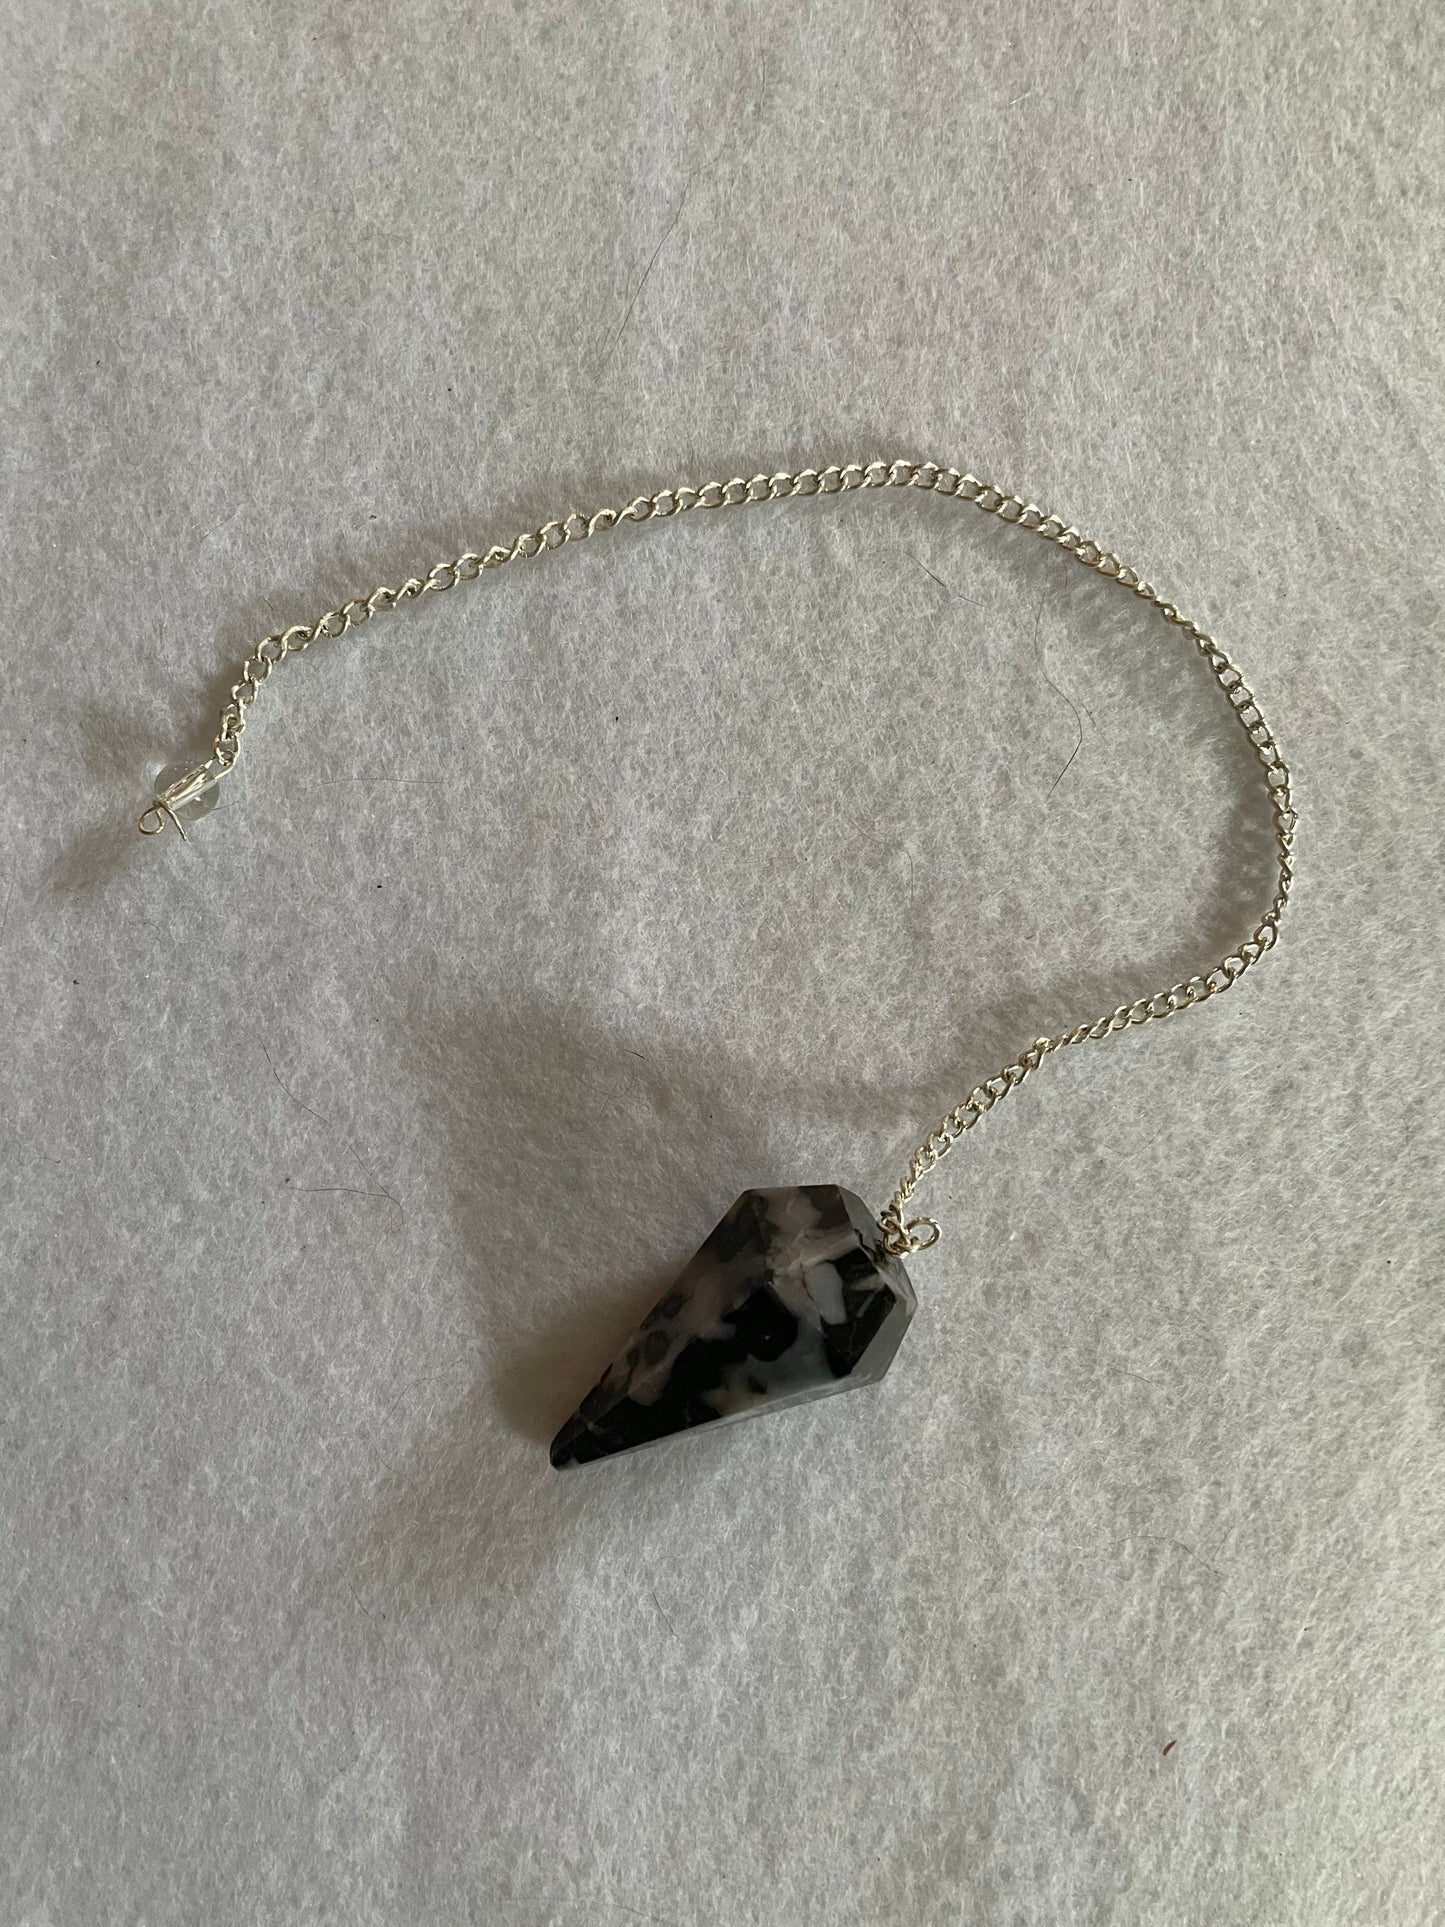 This beautiful Gabbro pendulum is approximately 1.5” and with chain is 9.5” total length.